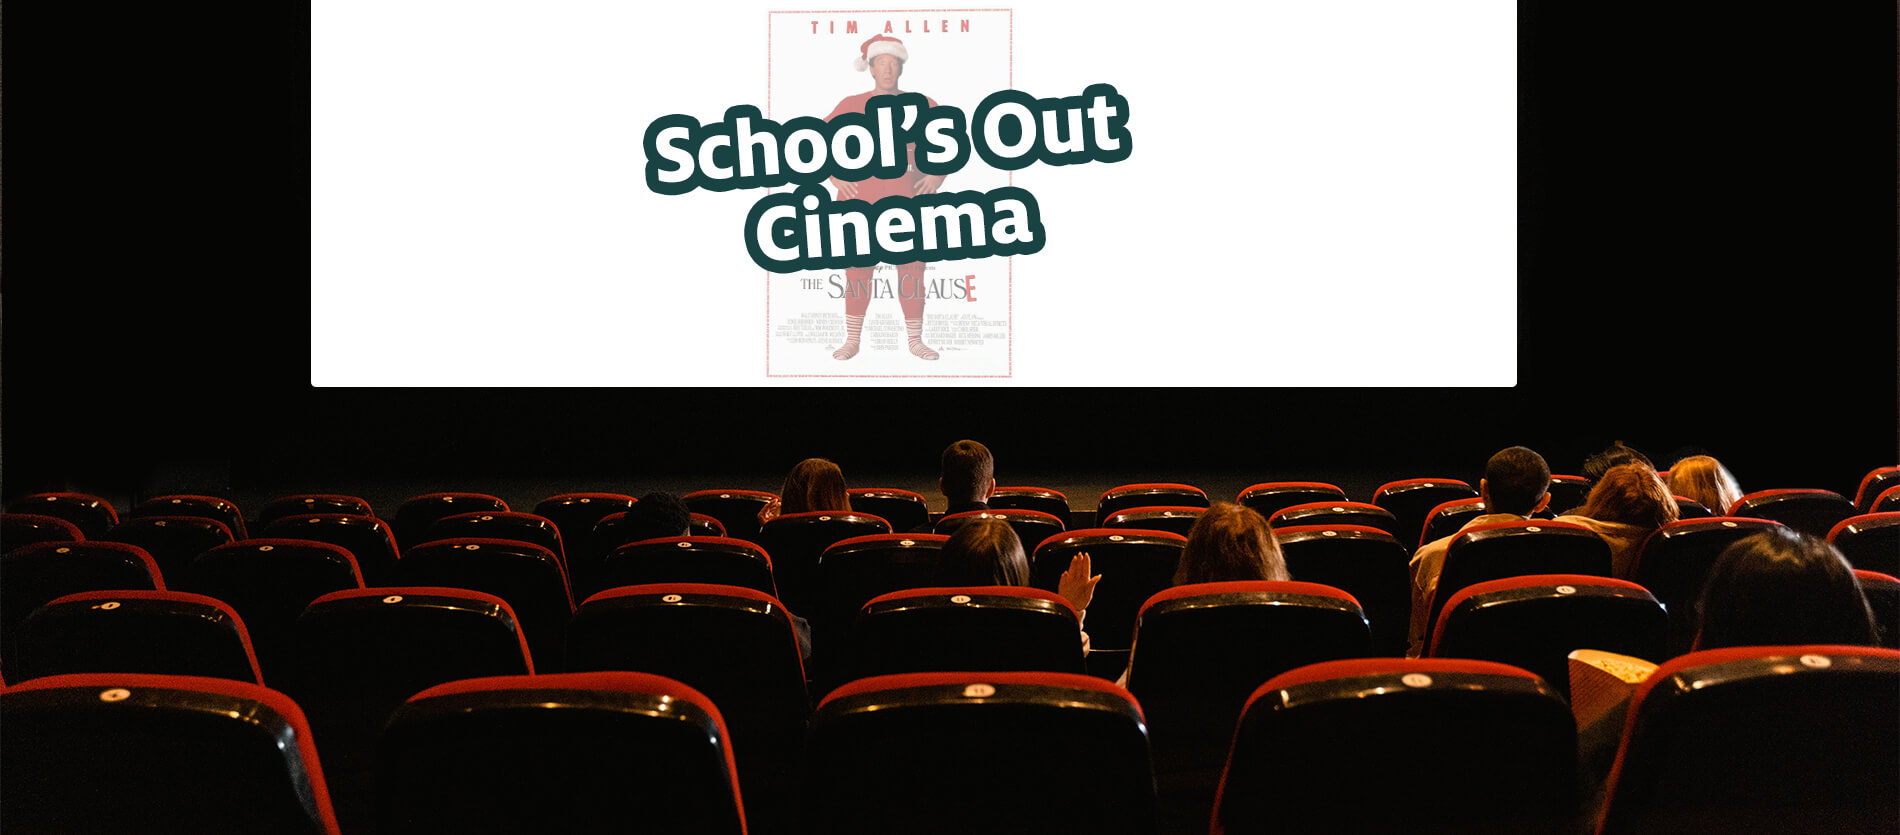 View from a theatre seating showing an animated movie